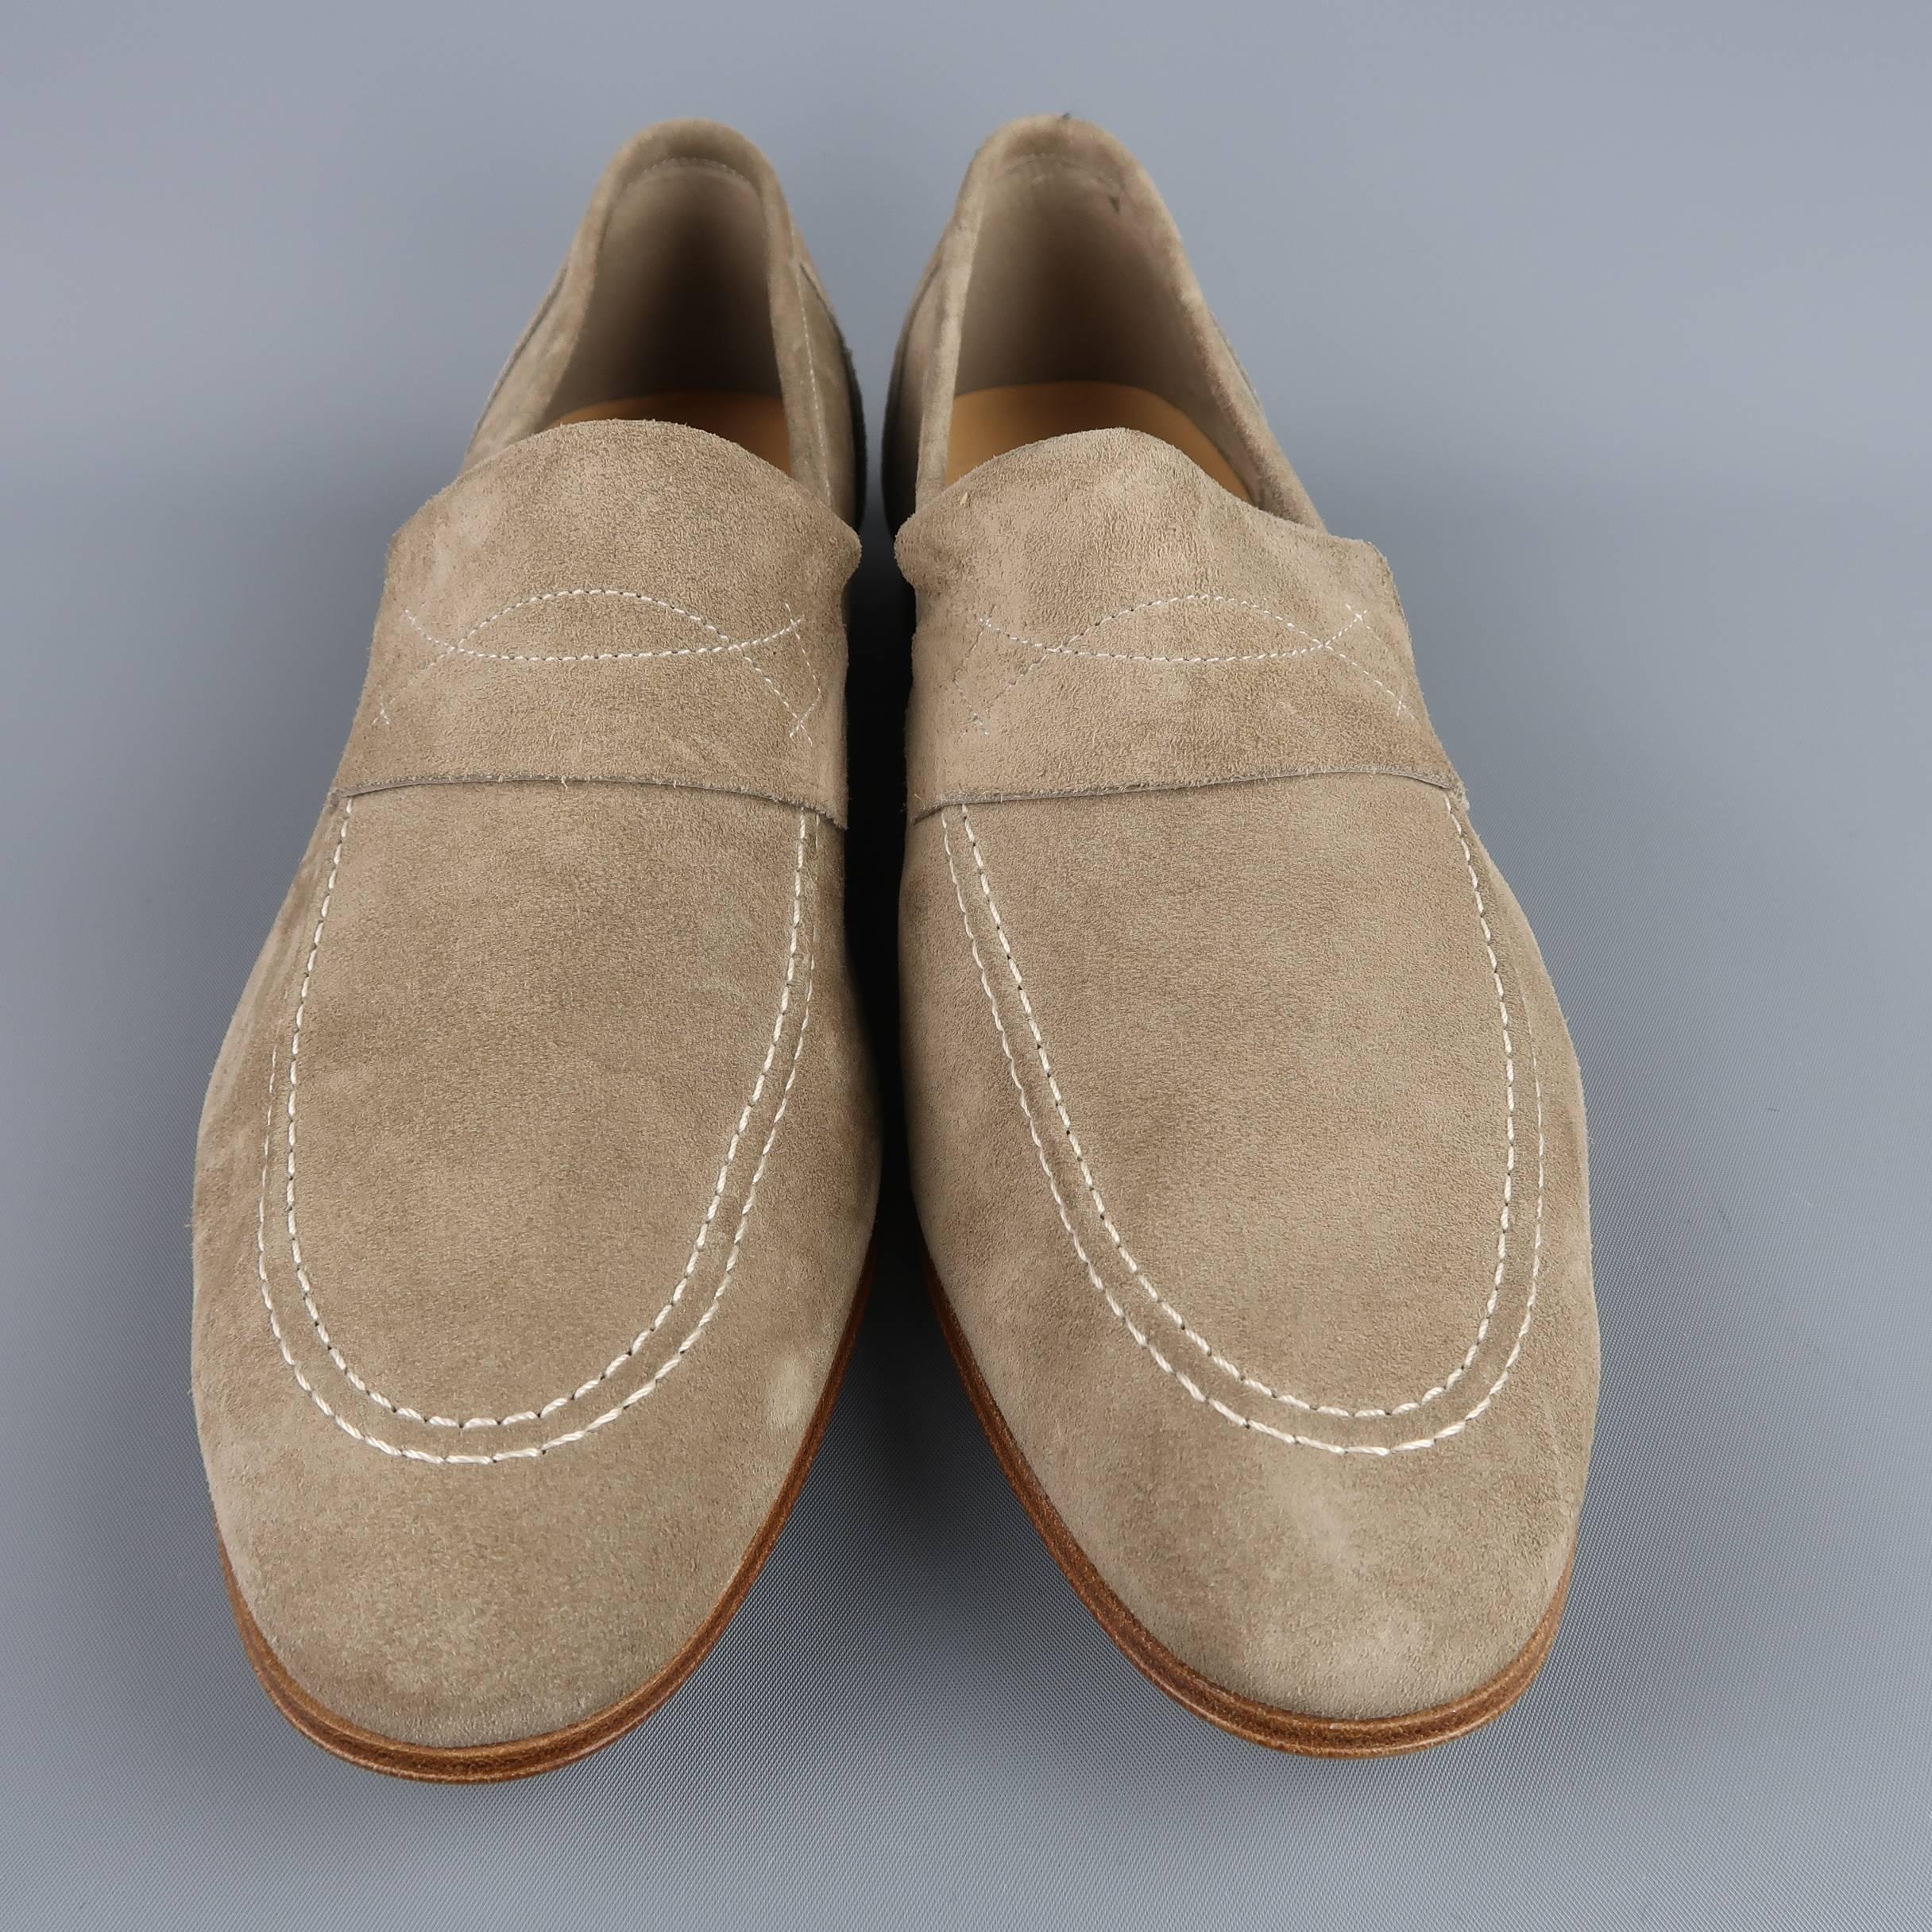 JOHN LOBB "YARDLEY" loafers come in light taupe gray suede with a rounded point toe, contrast top stitching, and tan stacked leather heel. With box. Made in Italy.
 
Brand New.  Retails: $745.00.
Marked: UK 9
 
Outsole: 11.75 x 4 in.
SKU: